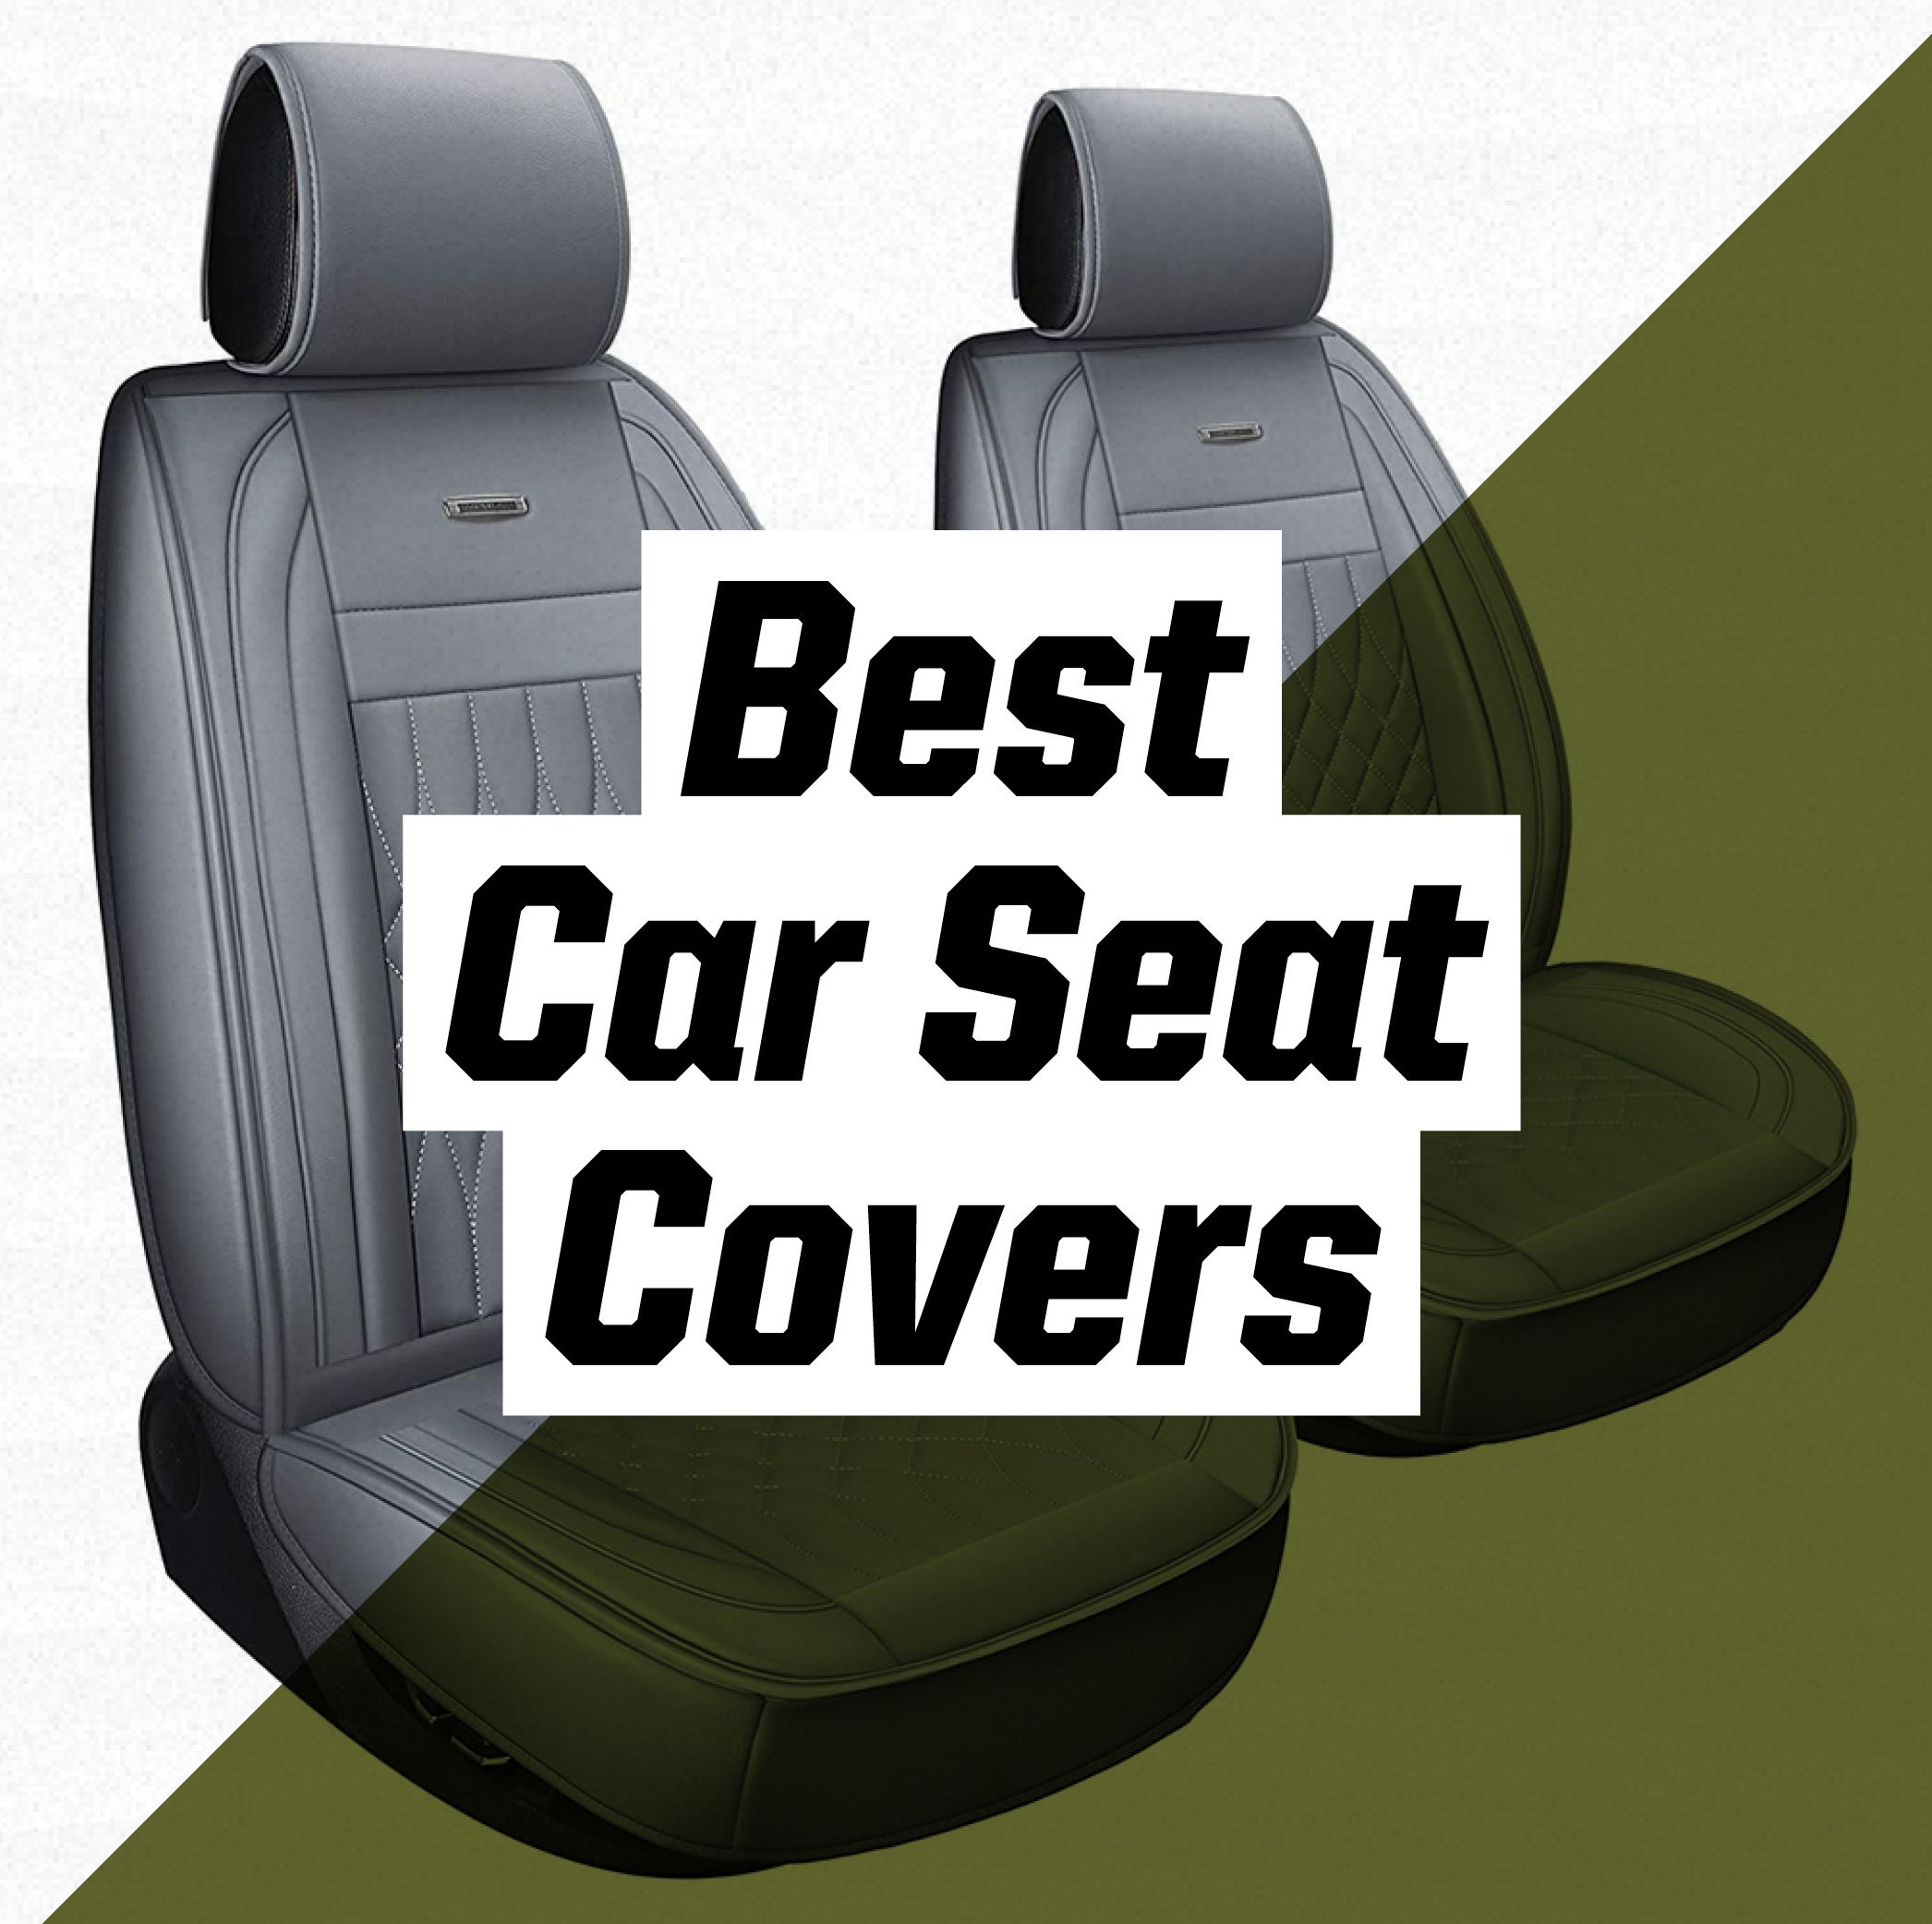 Protect Your Vehicle's Interior With These Top-Rated Car Seat Covers